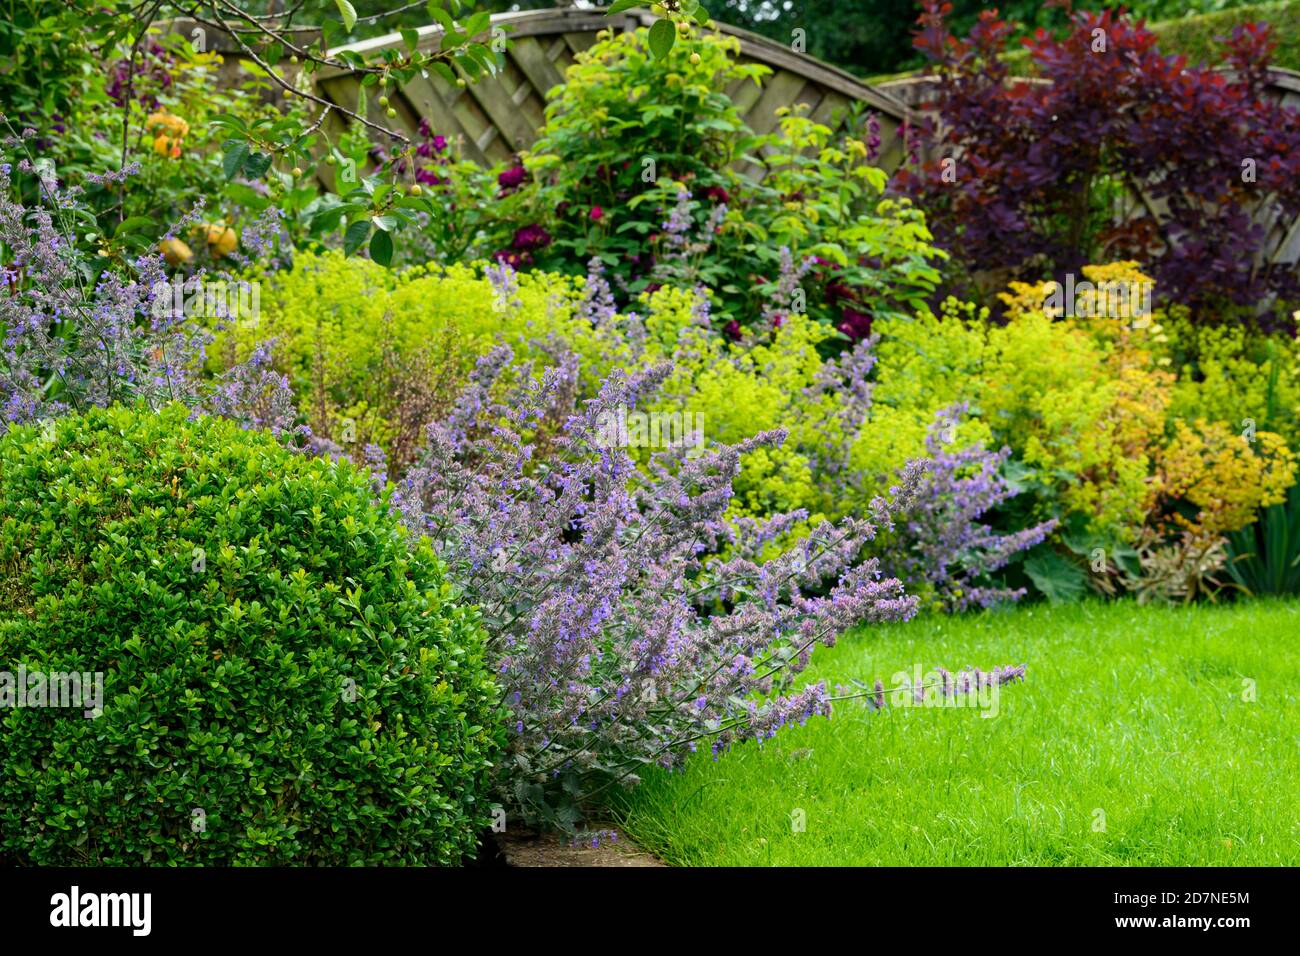 Landscaped private garden close-up (contemporary design, summer flowers, mixed border plants, shrubs, colourful foliage, lawn) - Yorkshire, England UK Stock Photo